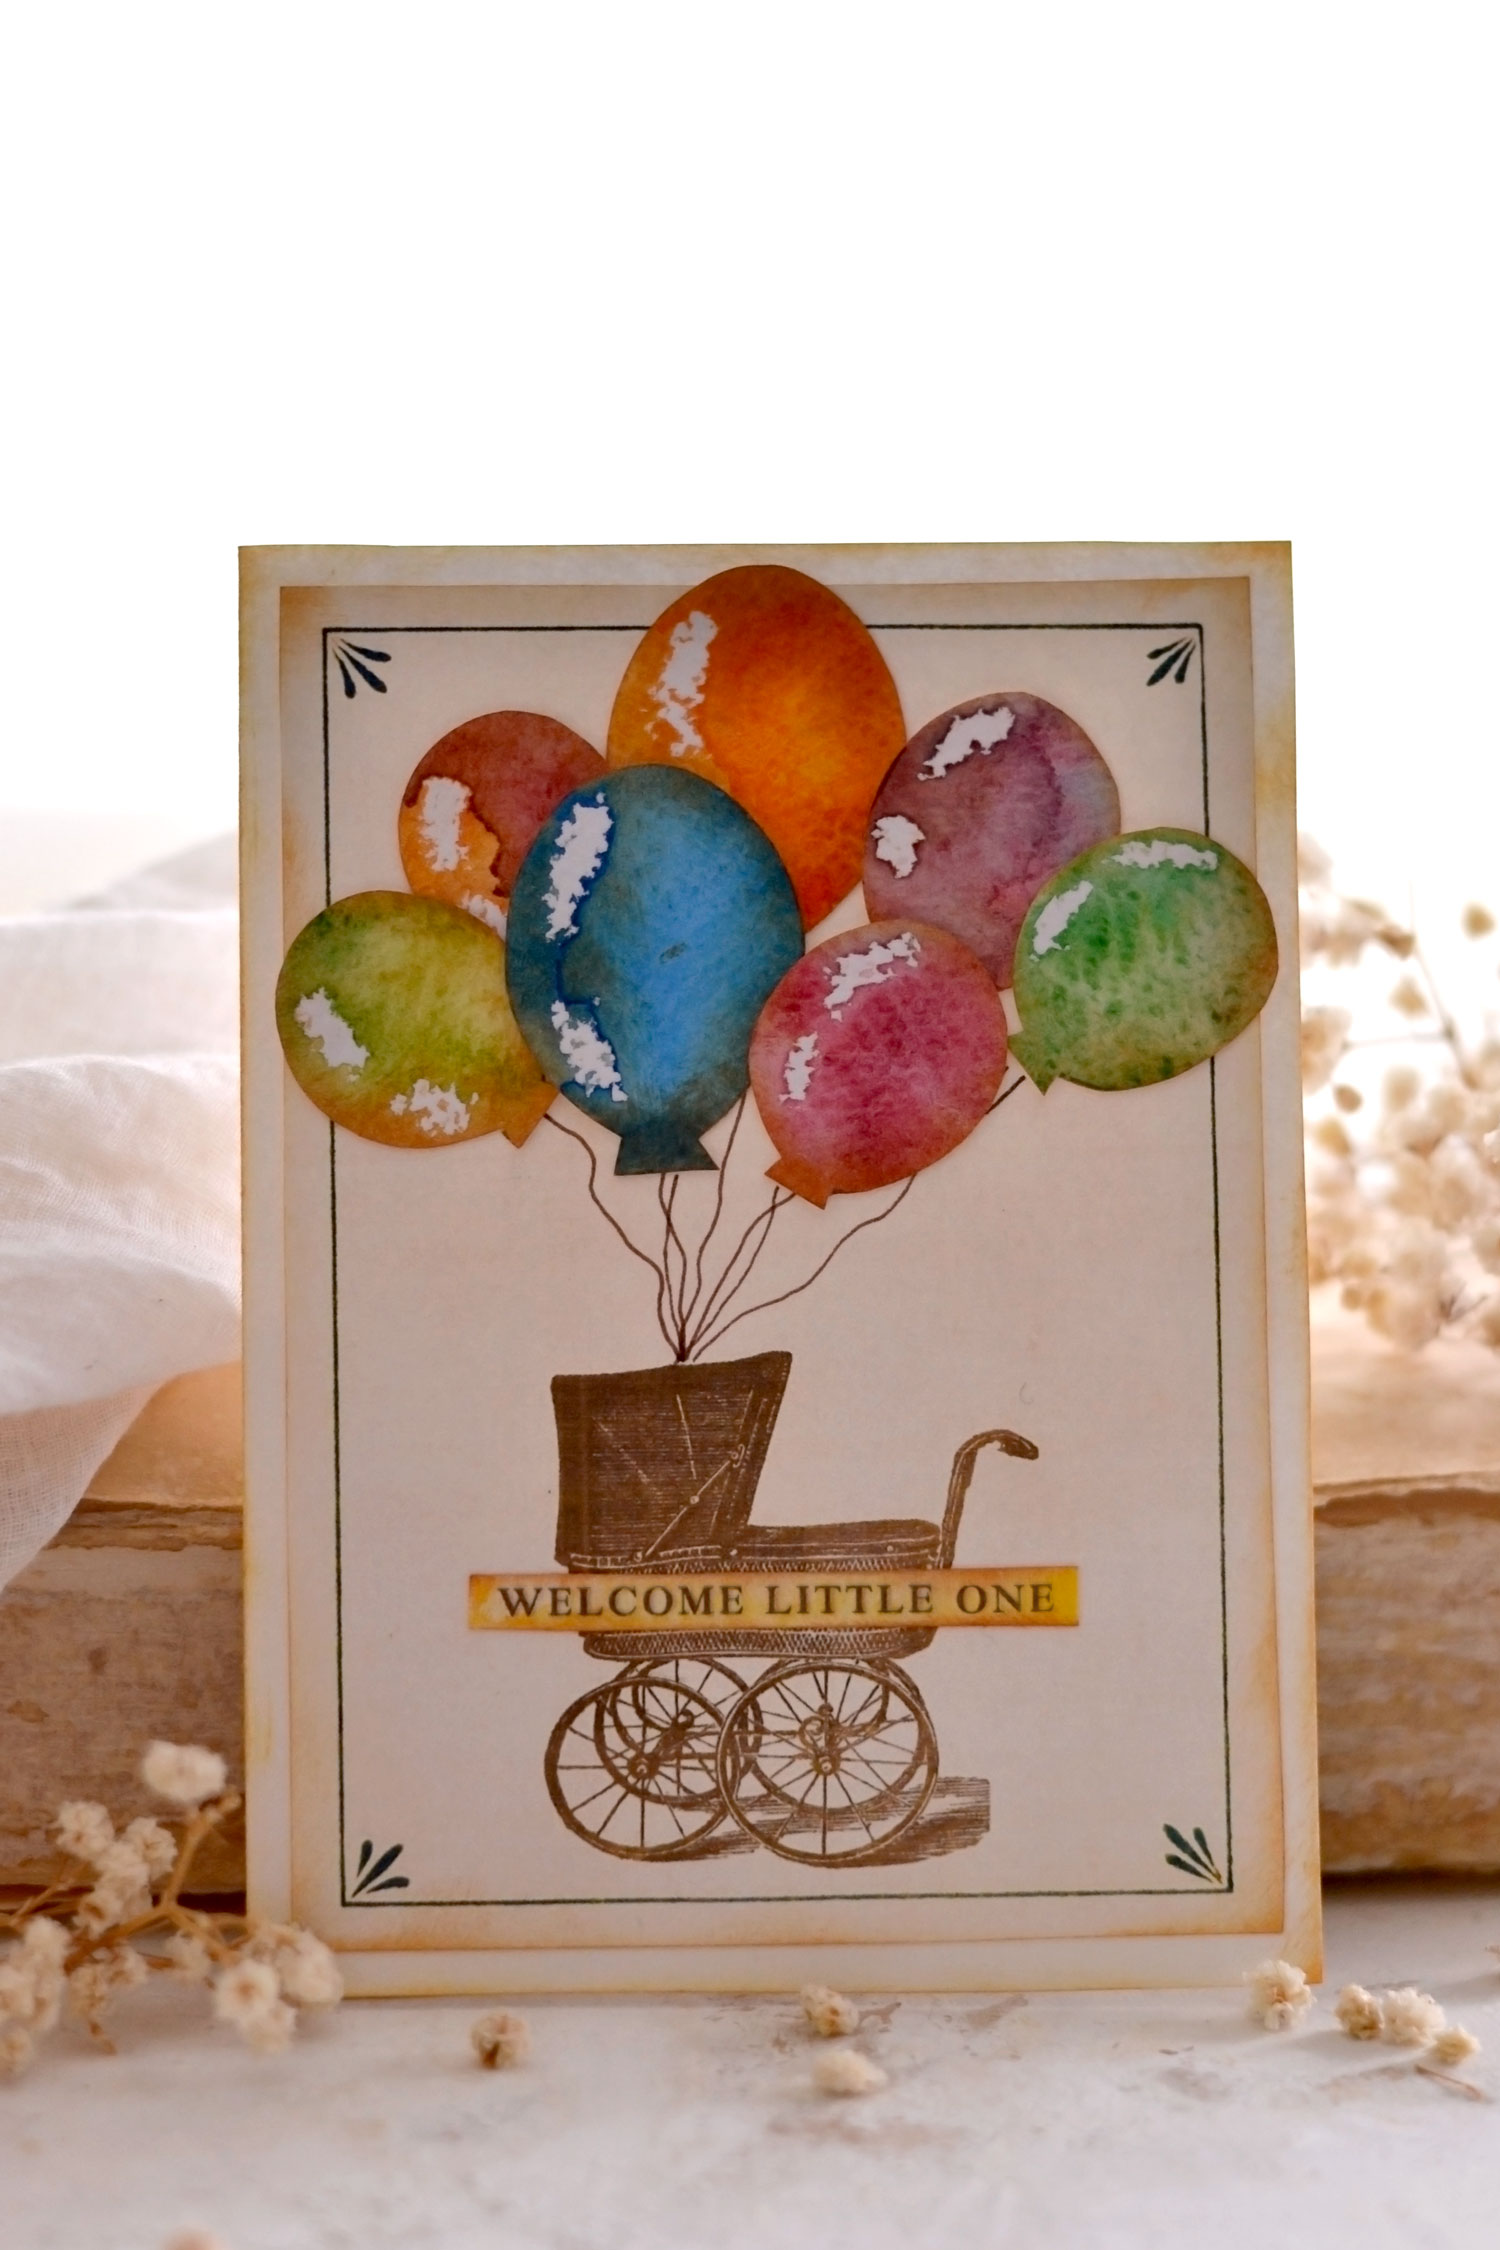 Vintage new baby card with watercolor balloons